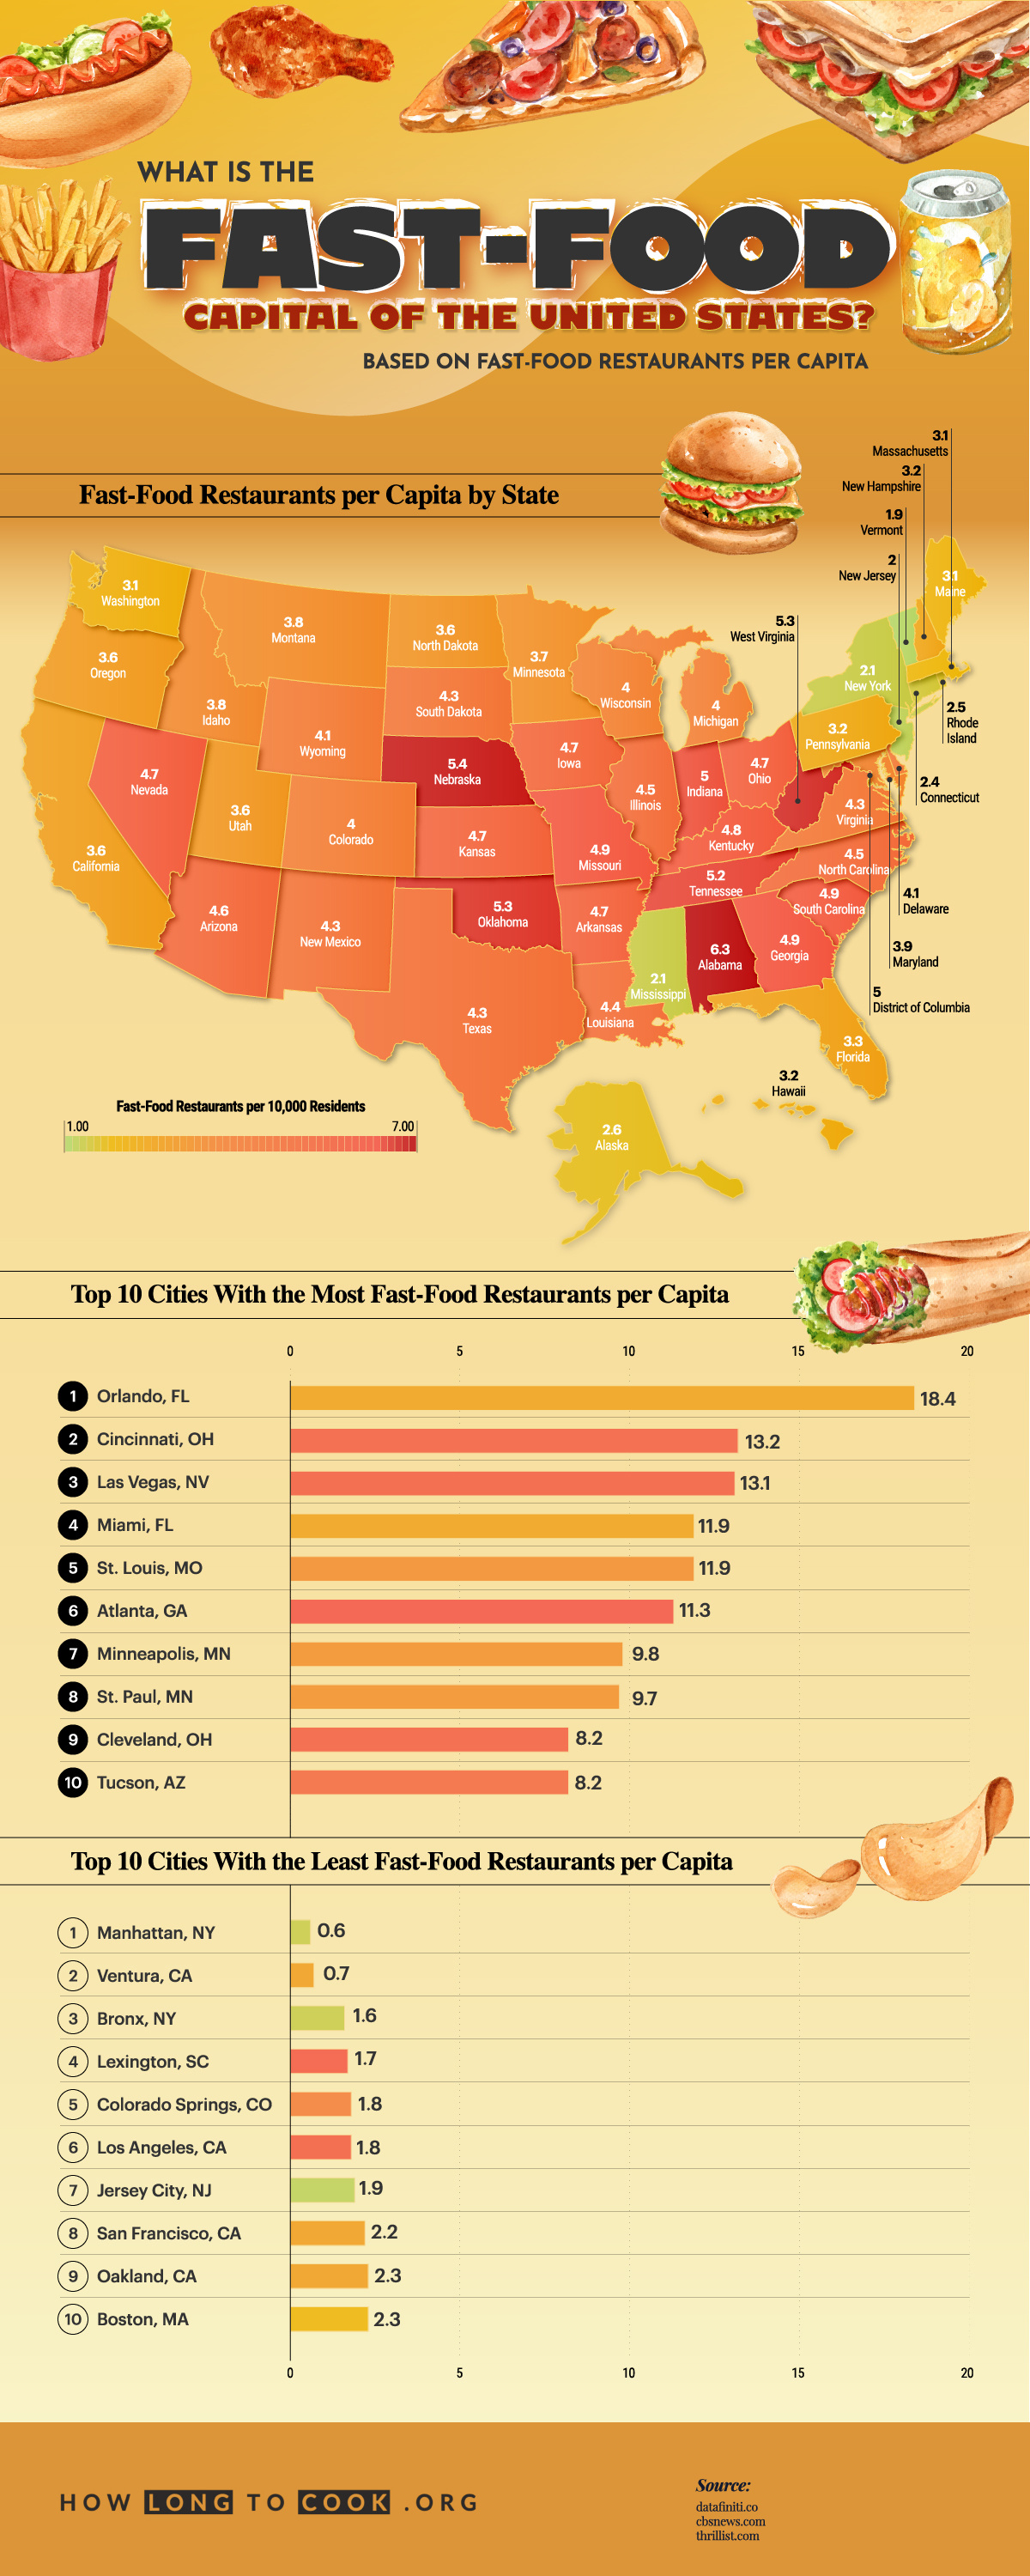 What Is the Fast-Food Capital of the United States? #Infographic